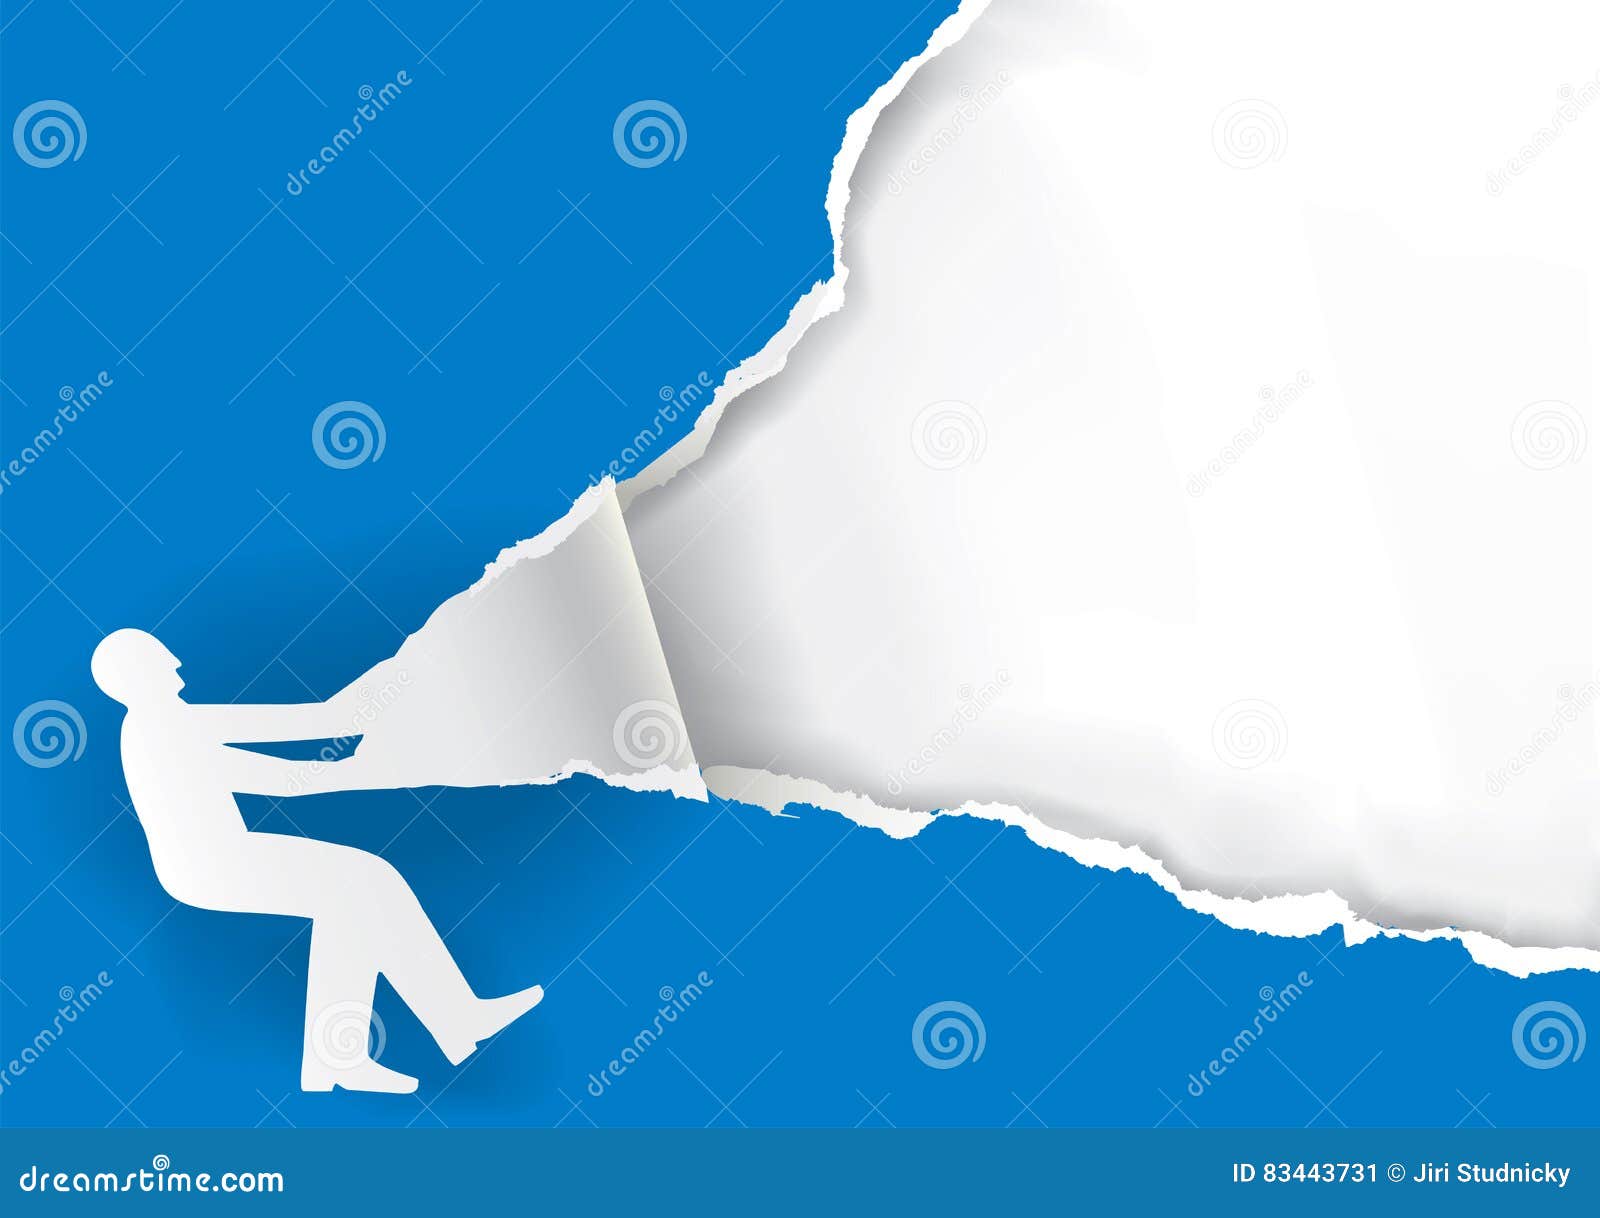 man paper silhouette ripping paper background